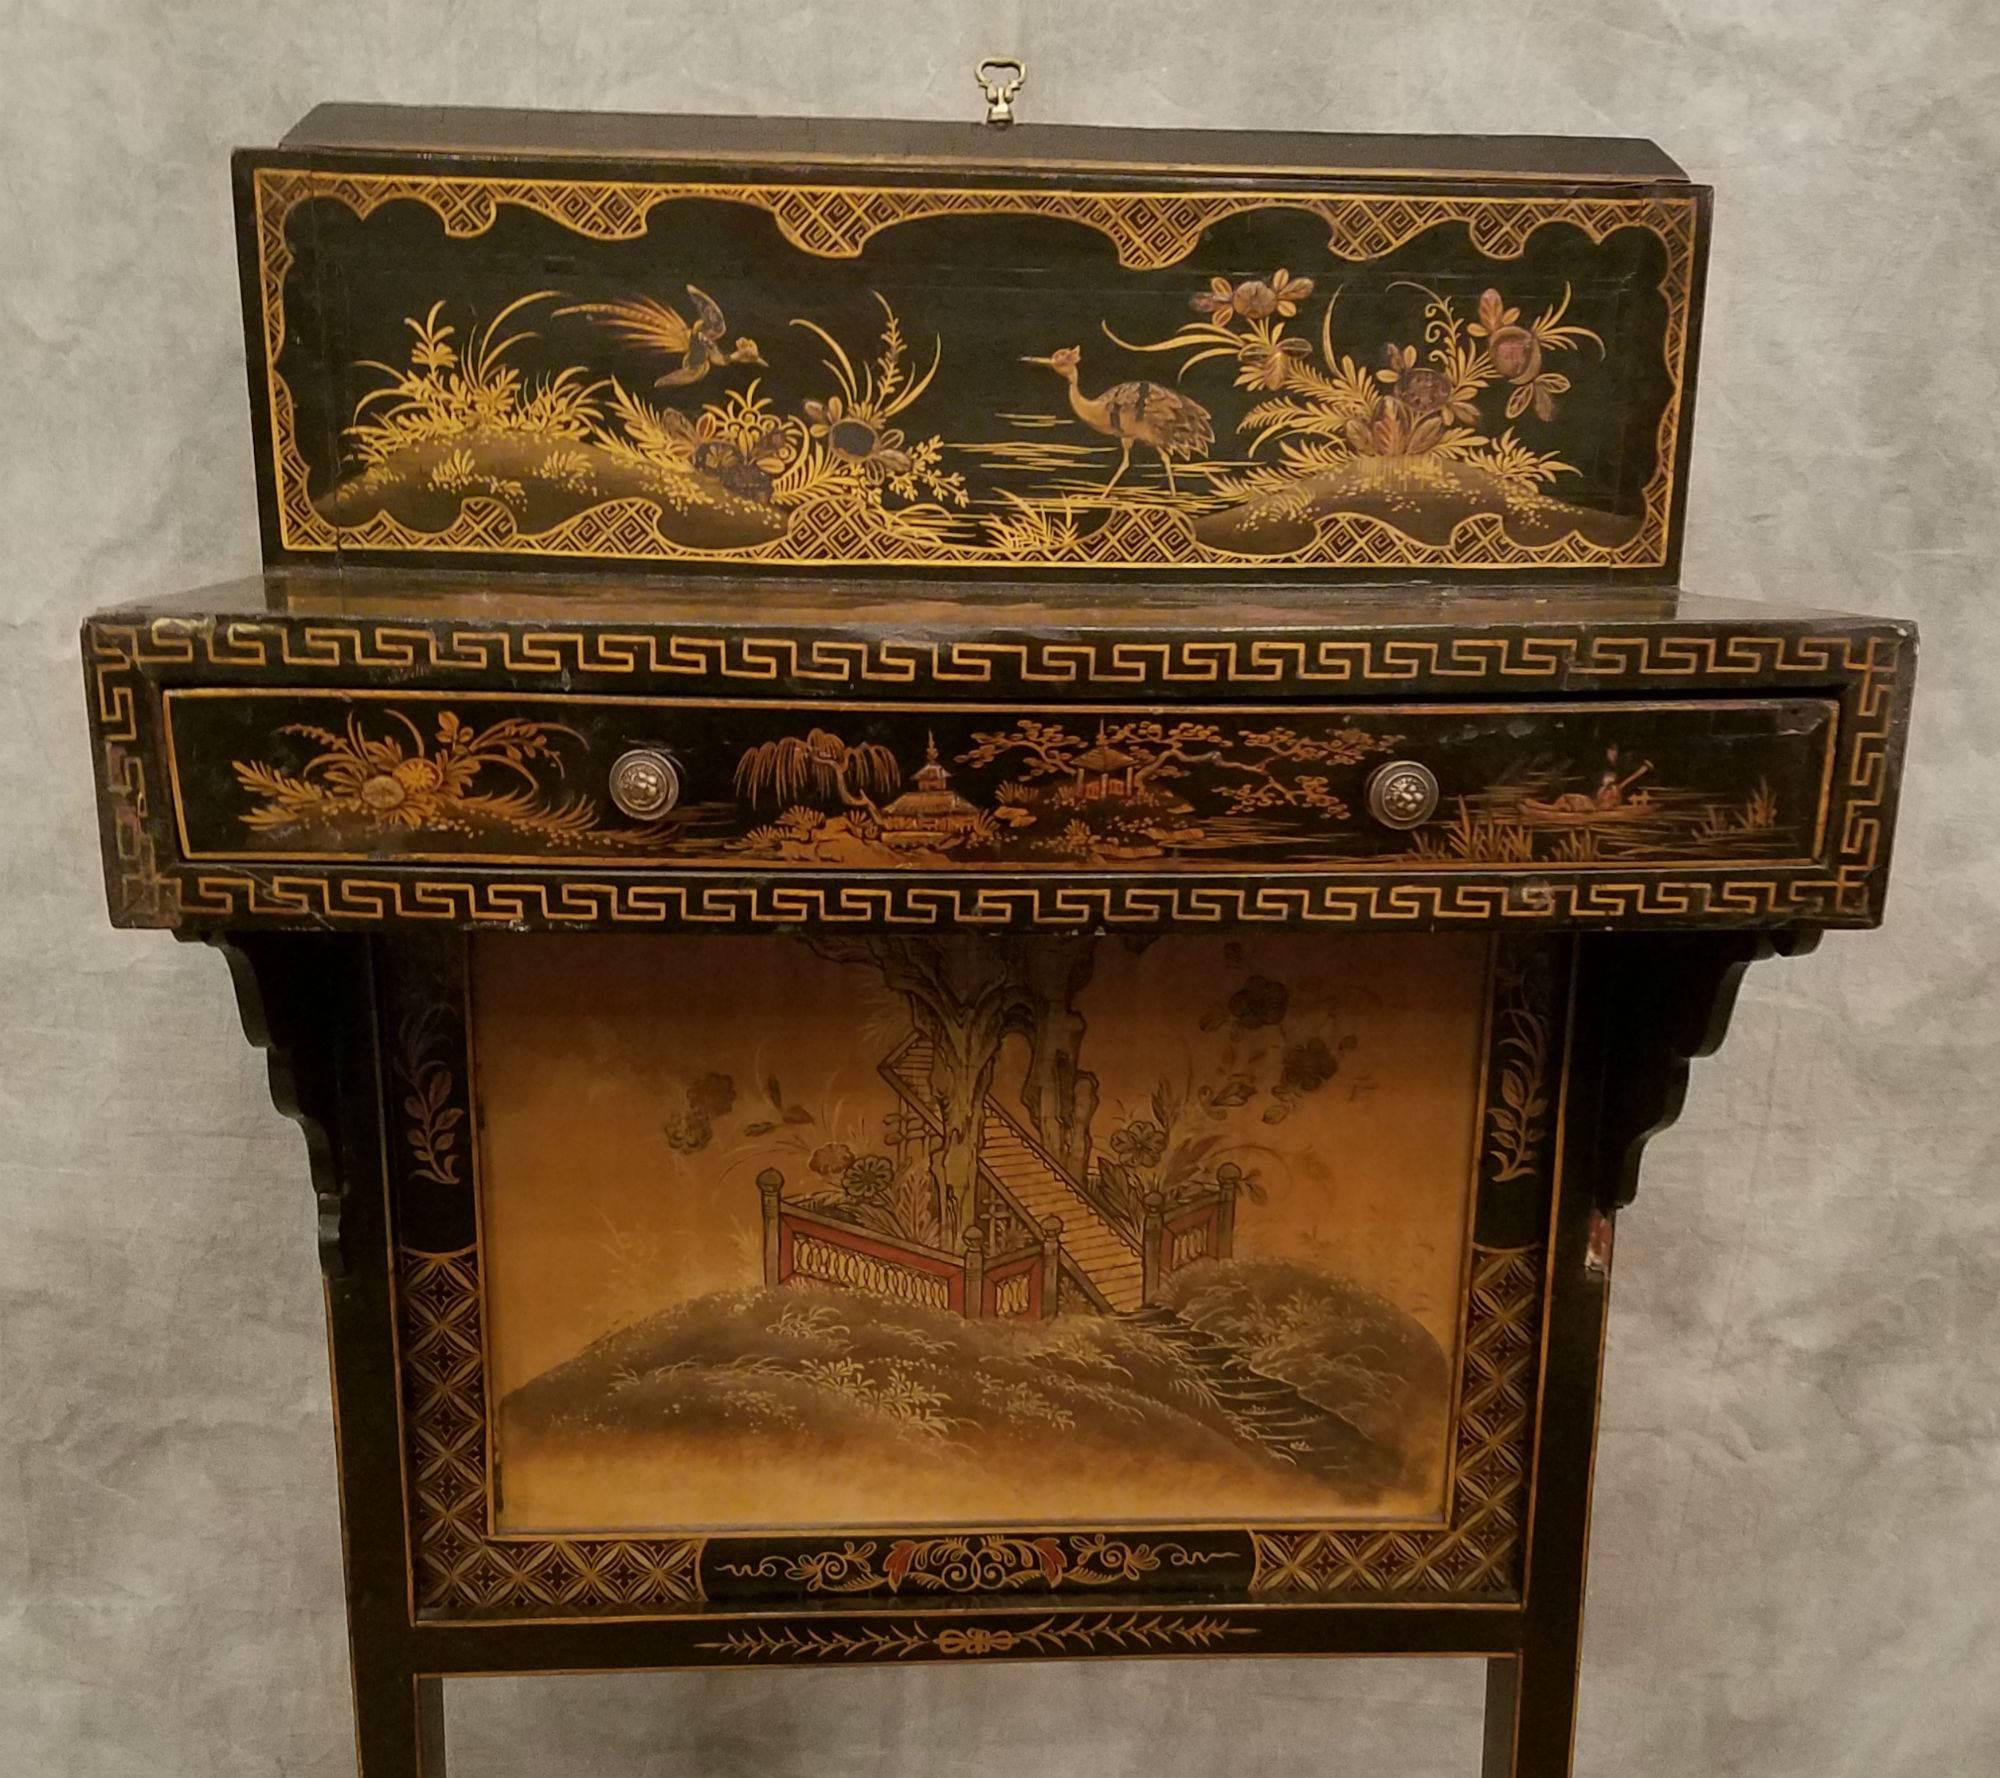 English chinoiserie black lacquer and gilt decorated fireside table or firescreen with a single frieze drawer; the interior of the drawer with a retailer's plaque. With screen extended H: 52